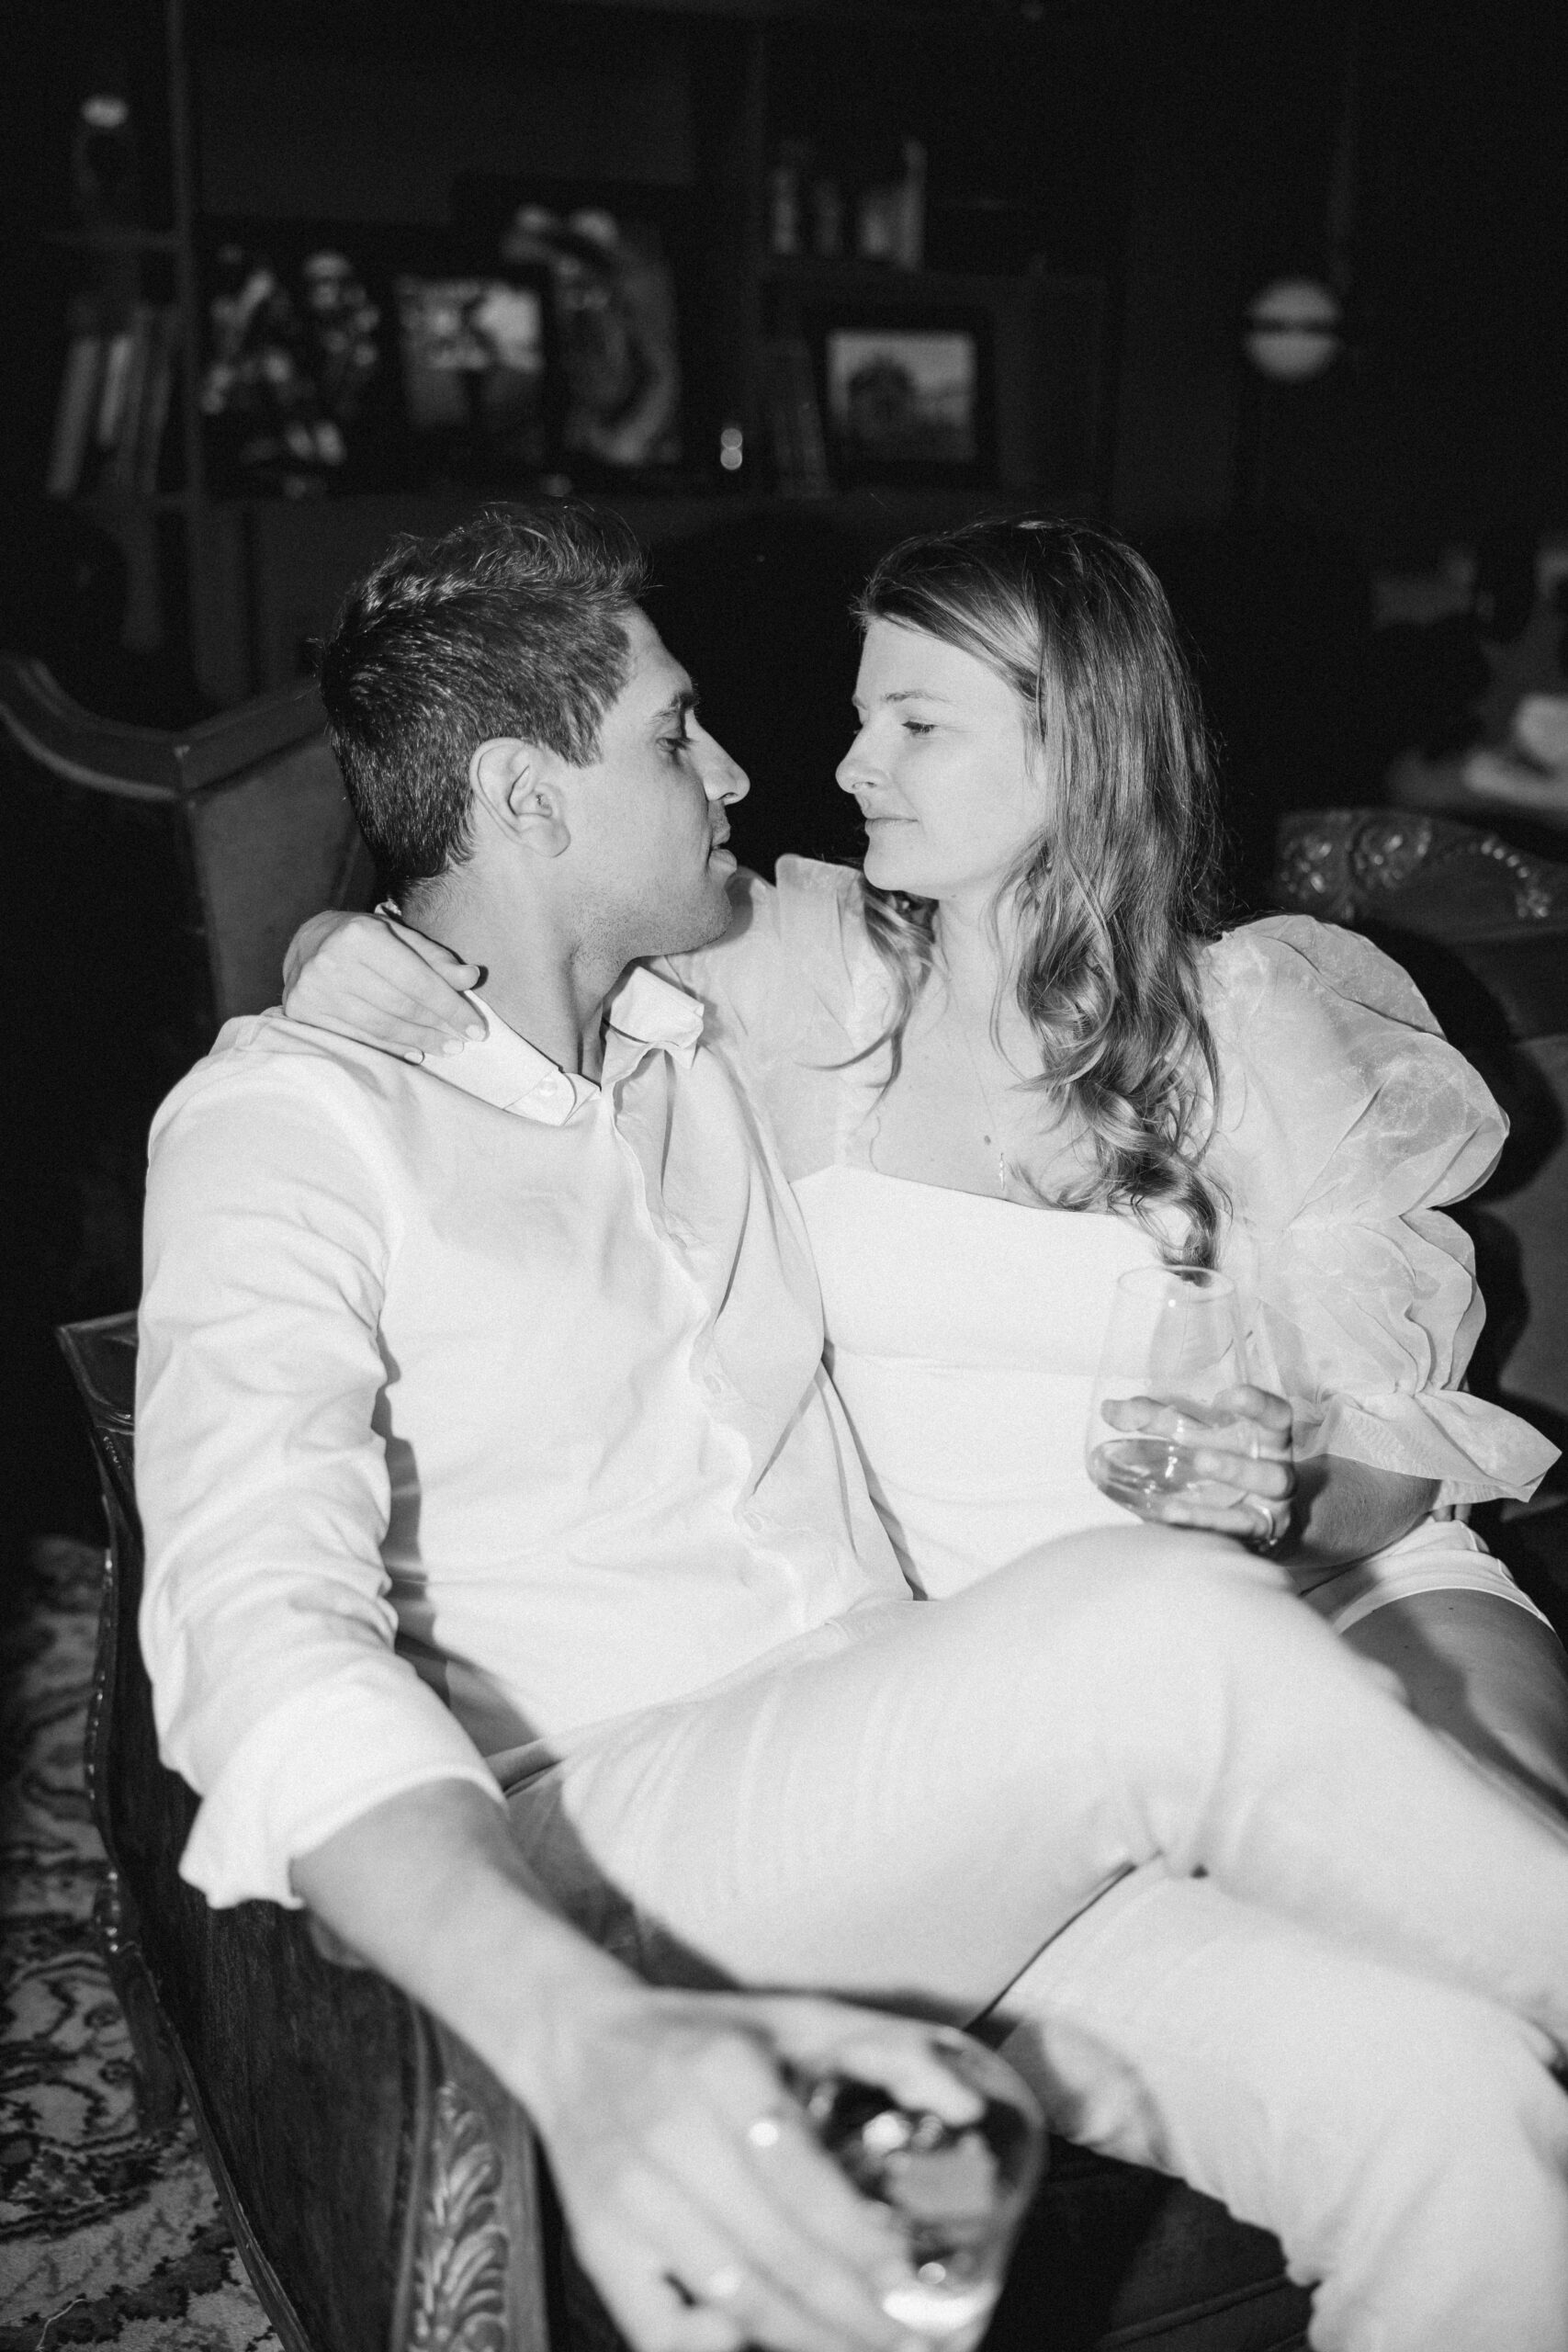 Stunning couple pose on the couch for flash photography during their Mexico city engagement photos